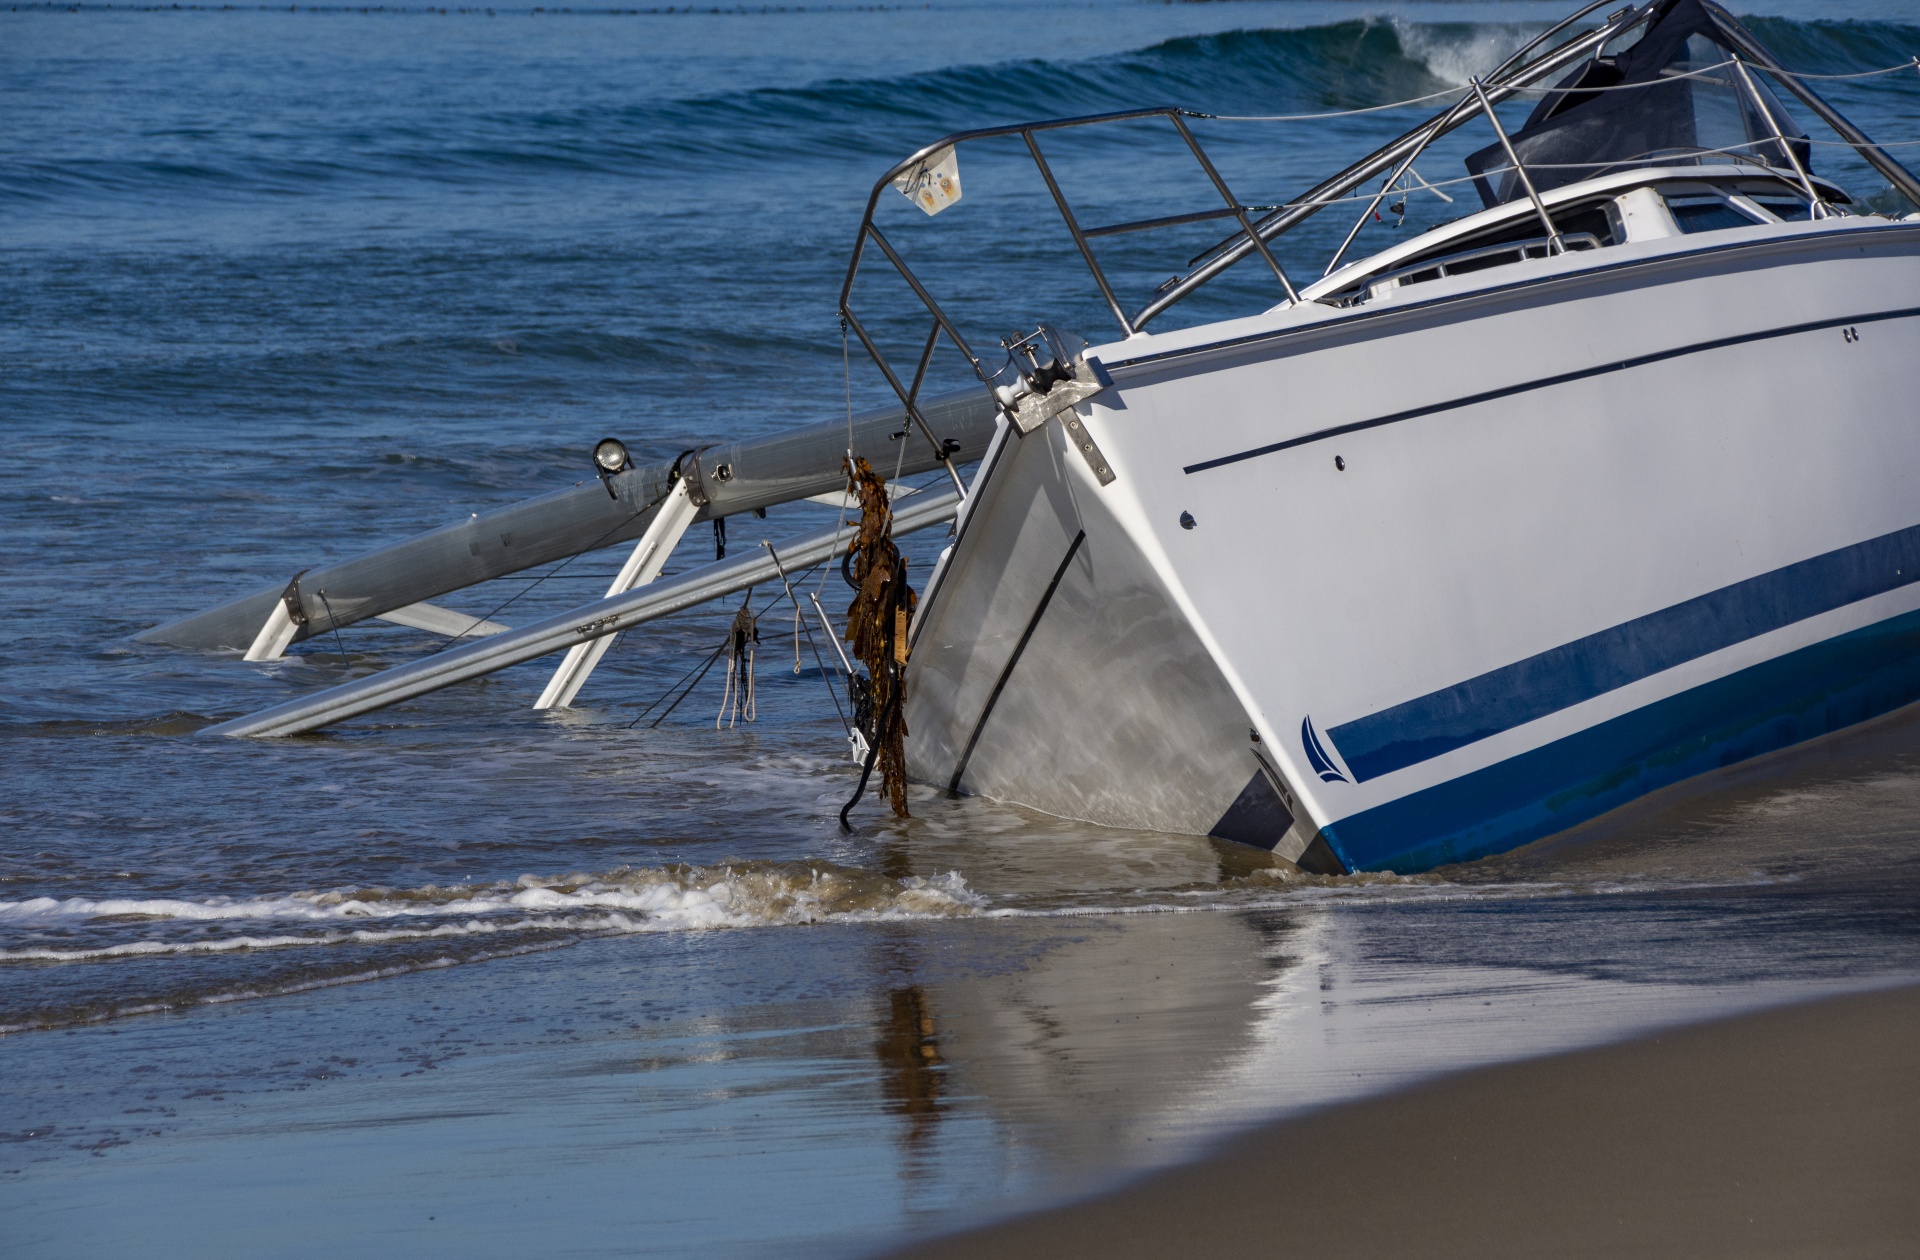 sailboat washed up on ocean shore